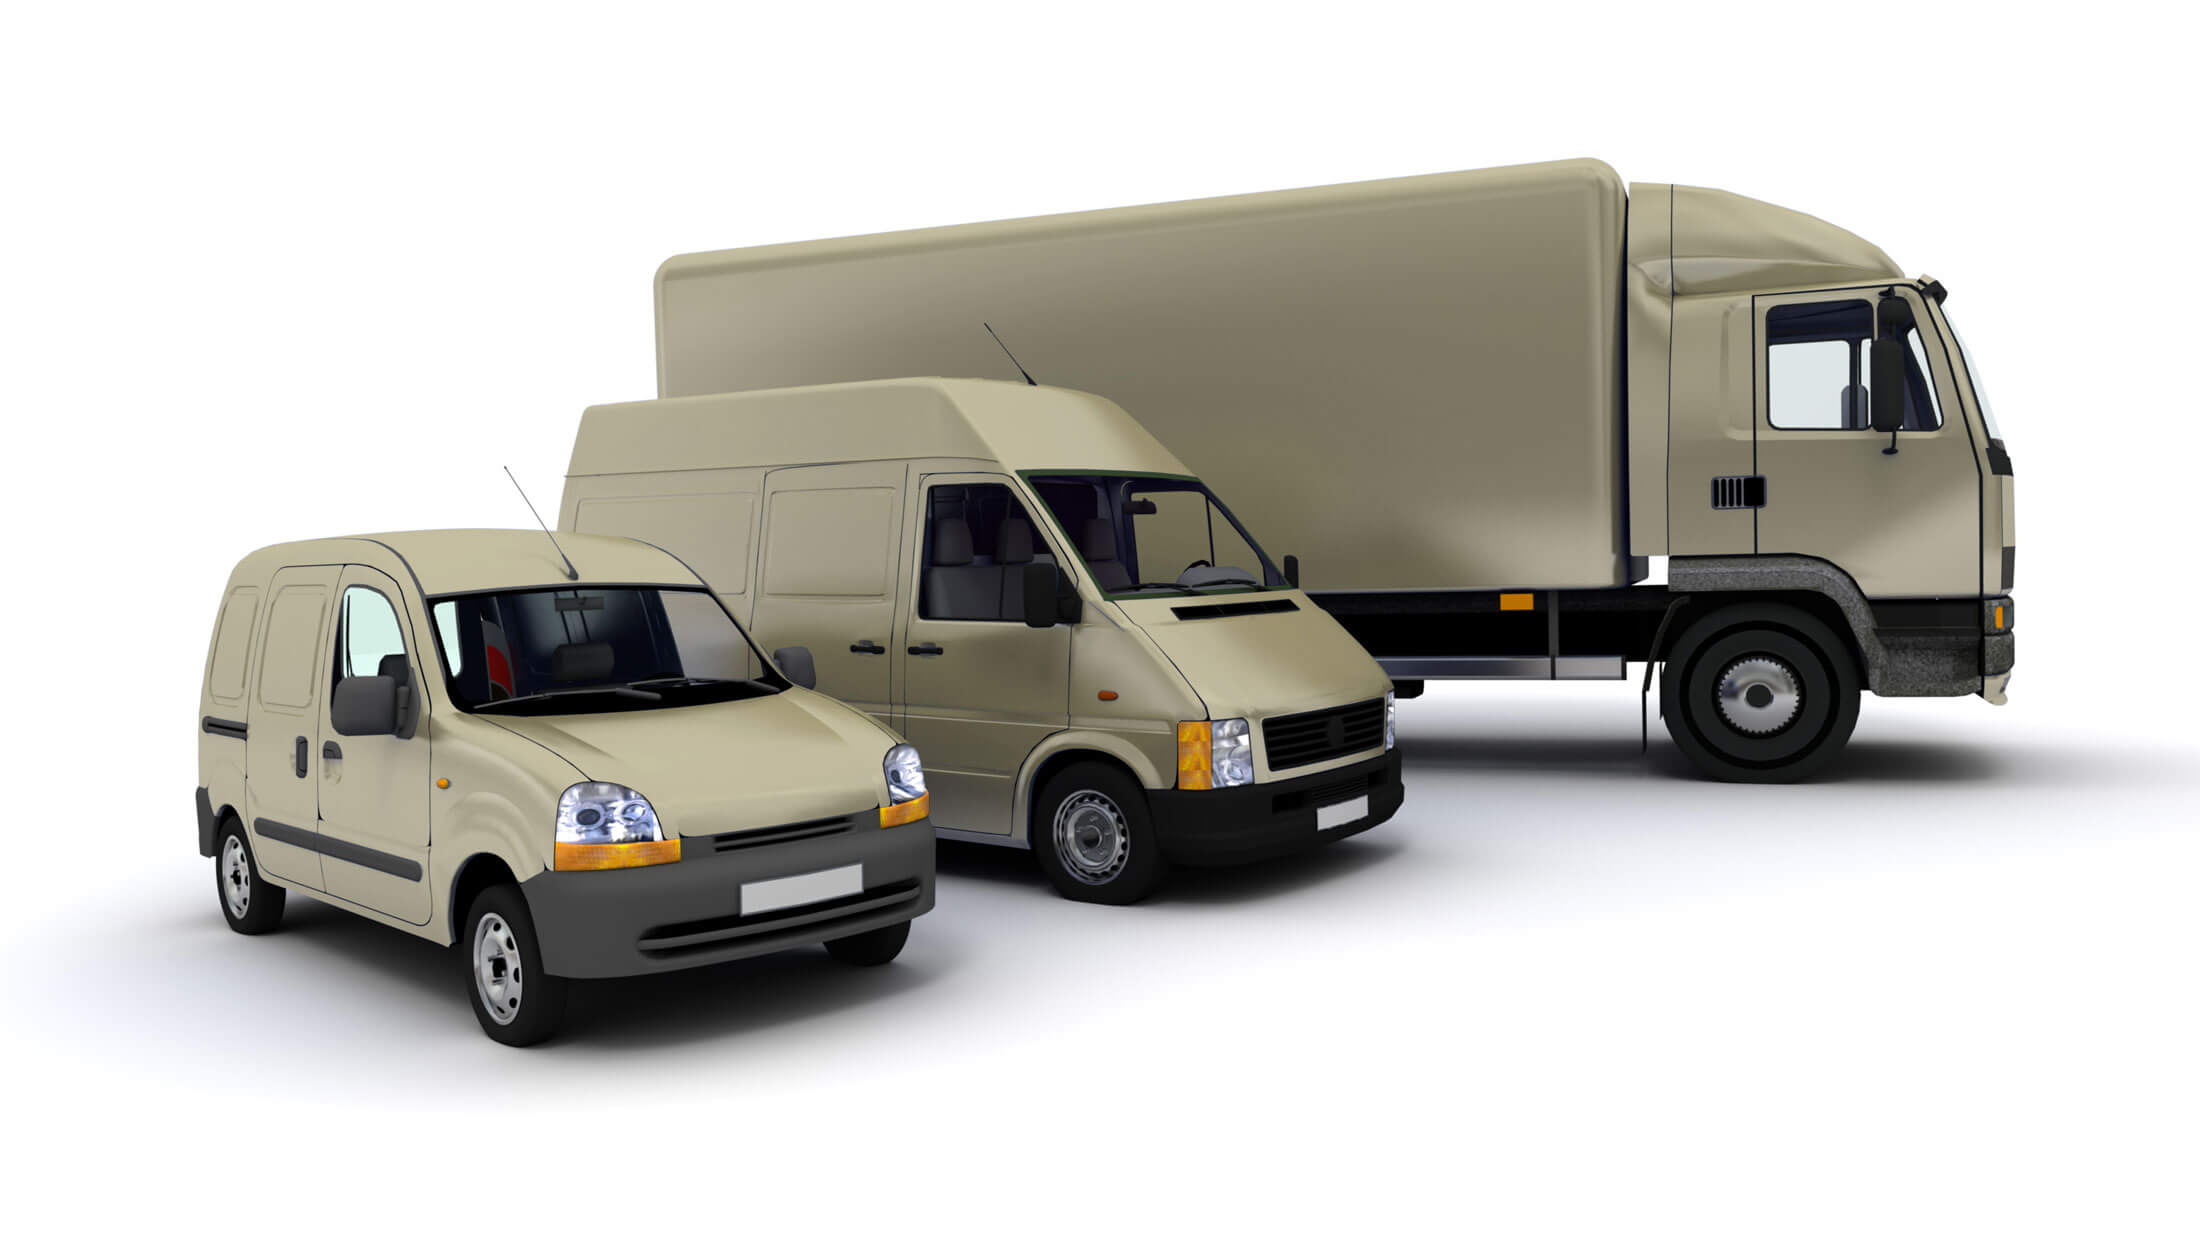 Vehicle Wraps And Fleet Graphics: Five Mistakes To Avoid